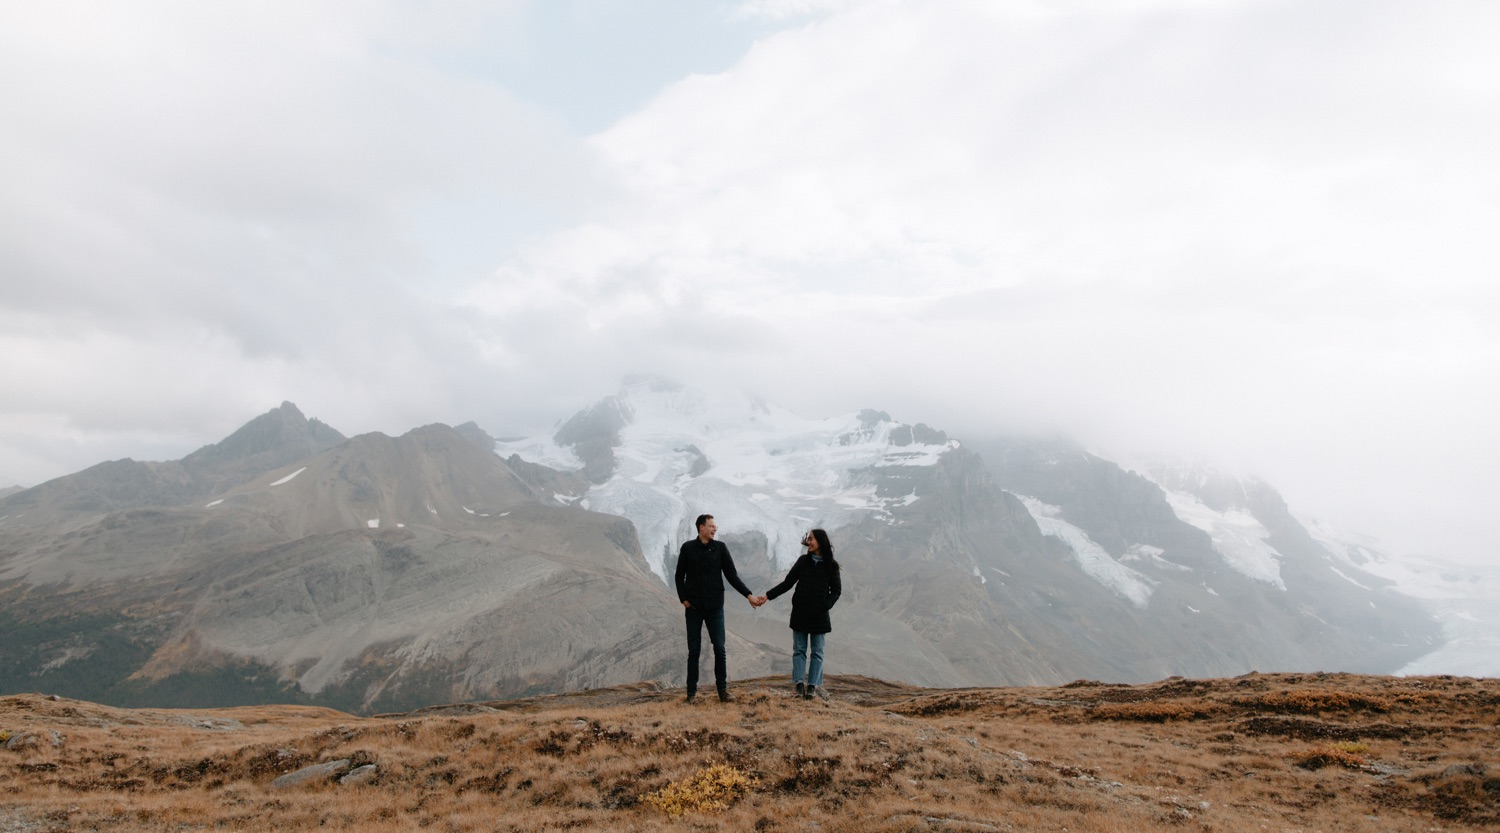 Ridge engagement photography session up the Icefields Parkway with couple holding one hand looking at each other